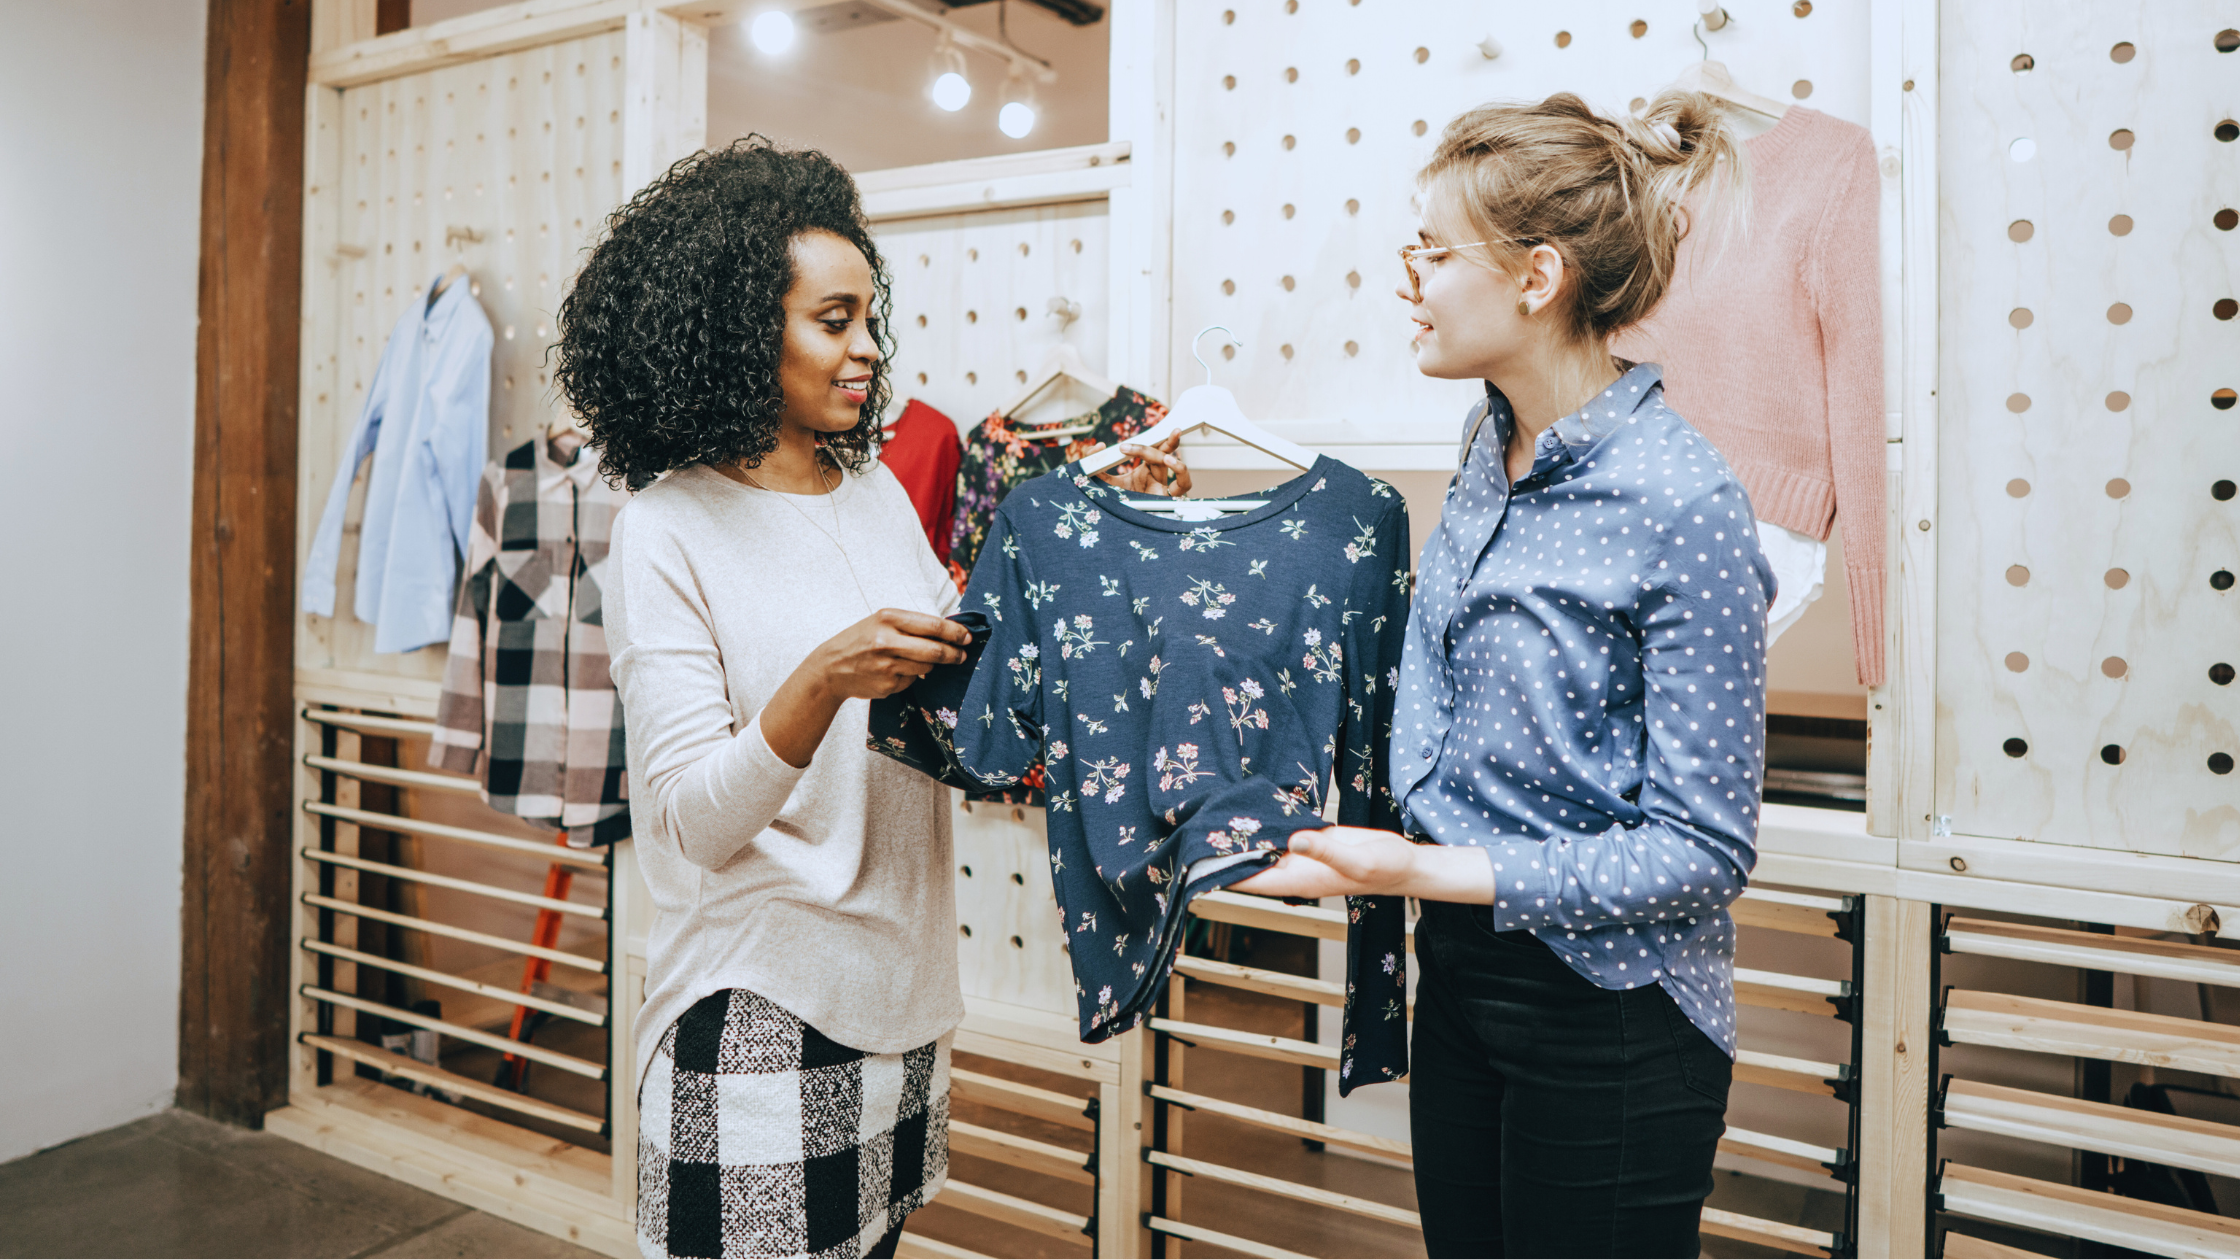 5 Tips to Help Your Retail Business Avoid Losing Sales | Retail employee with customer